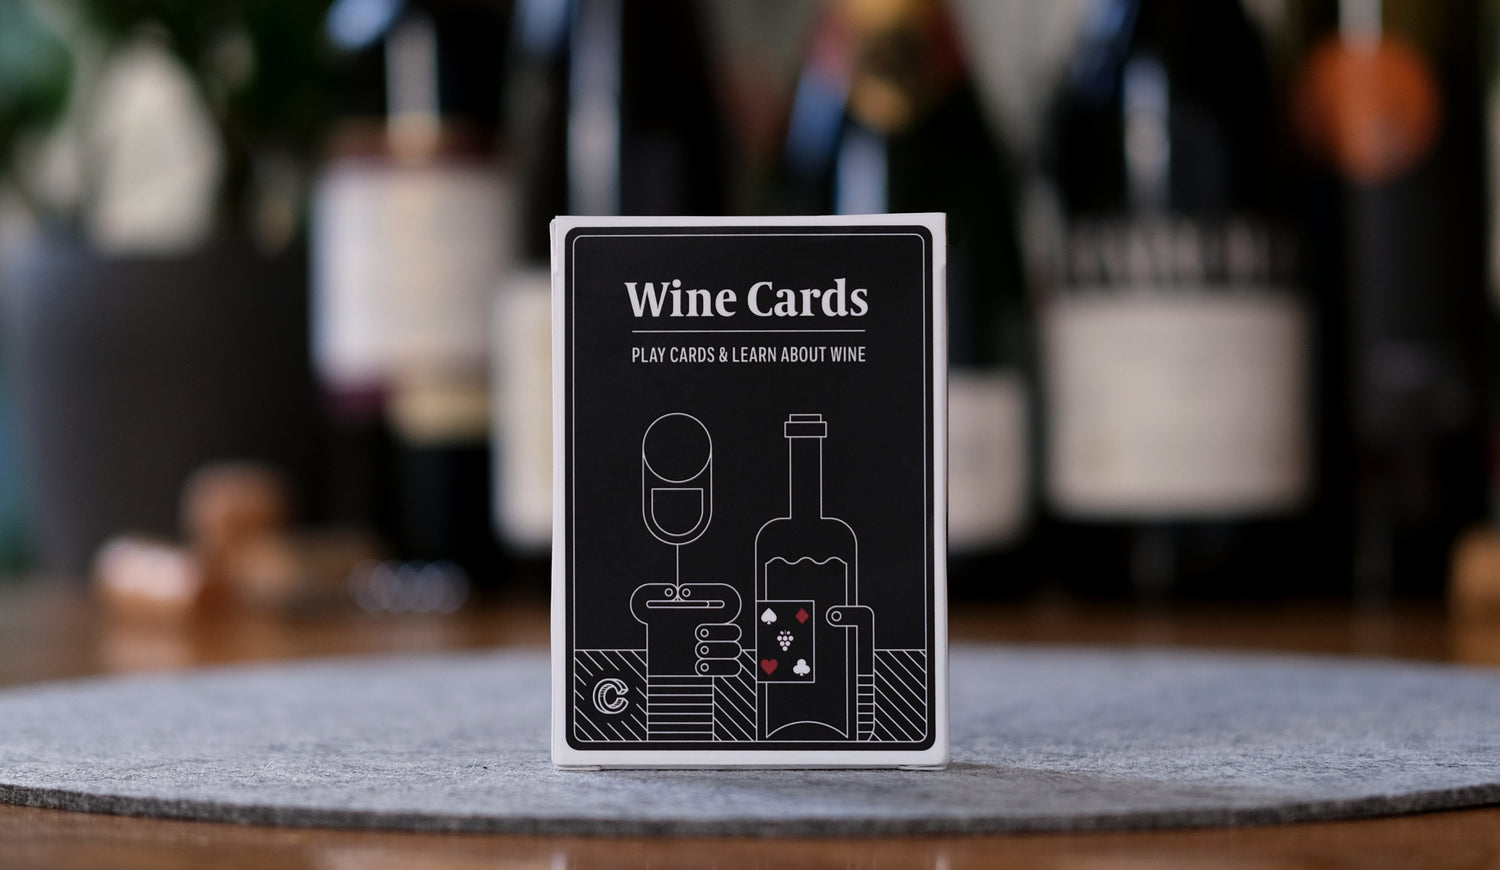 A prototype deck of Wine Cards from the Kickstarter campaign